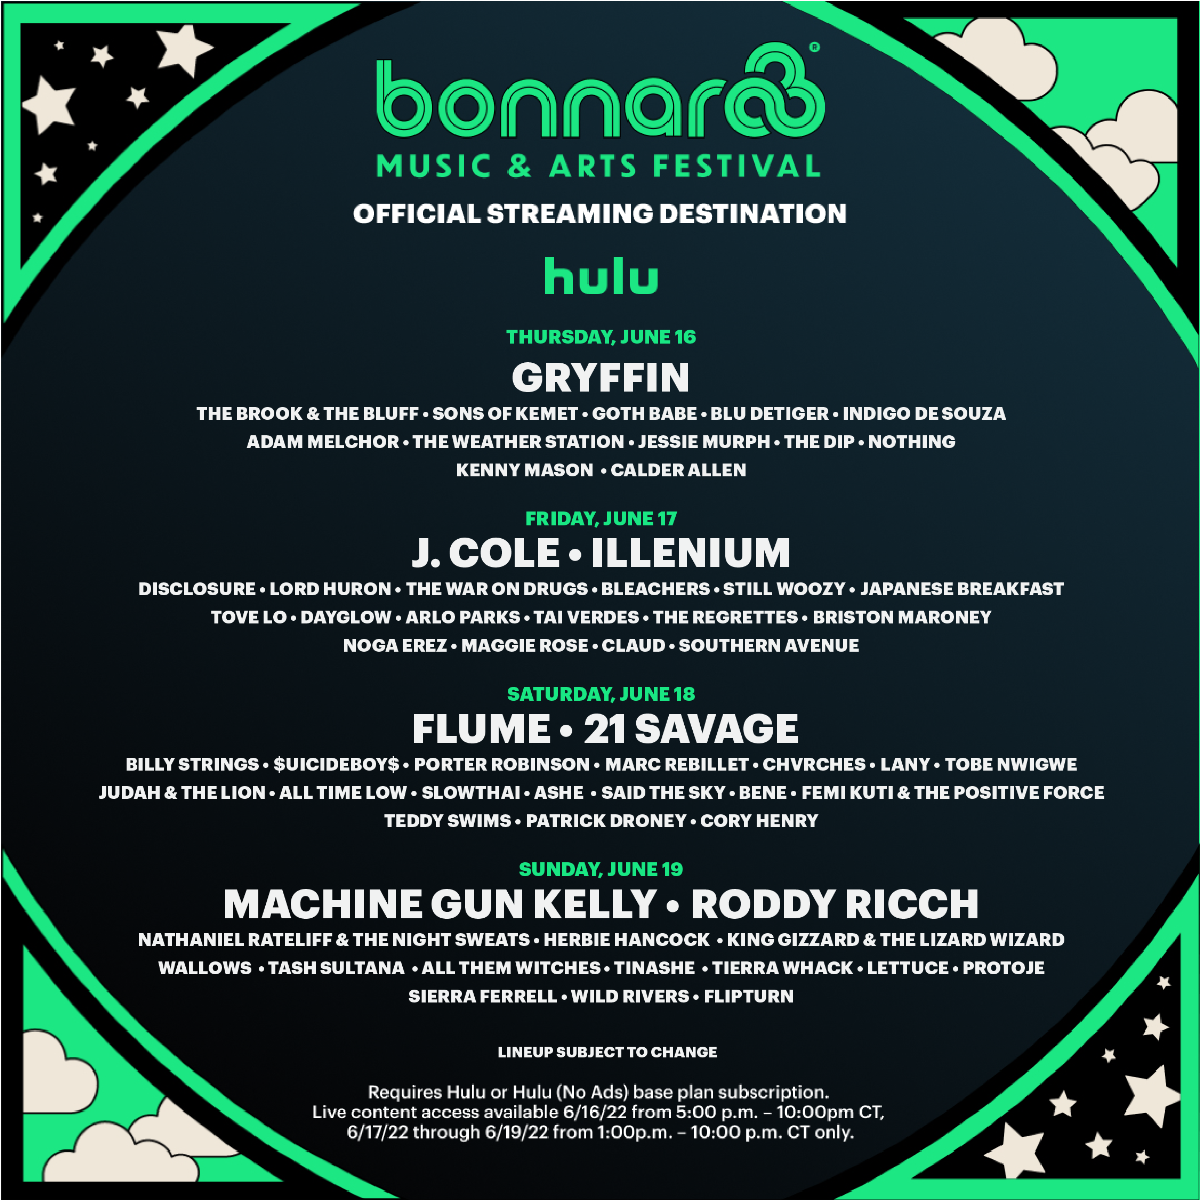 Bonnaroo Announces Hulu Livestream Lineup: J. Cole, Flume, Illenium, 21 Savage, Billy Strings and More